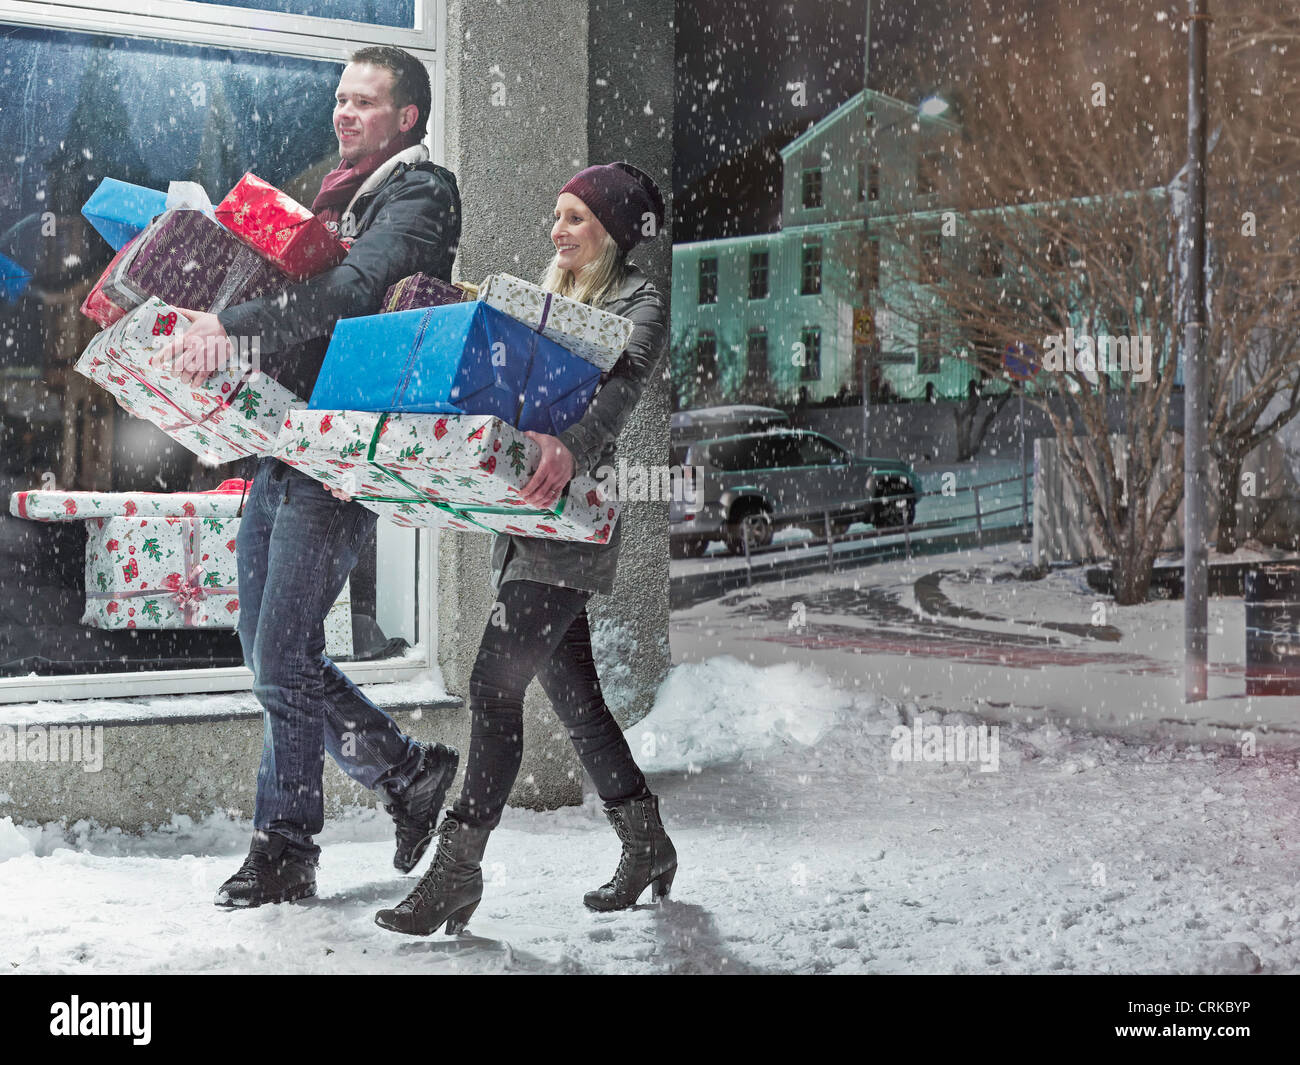 Couple with Christmas gifts in snow Stock Photo